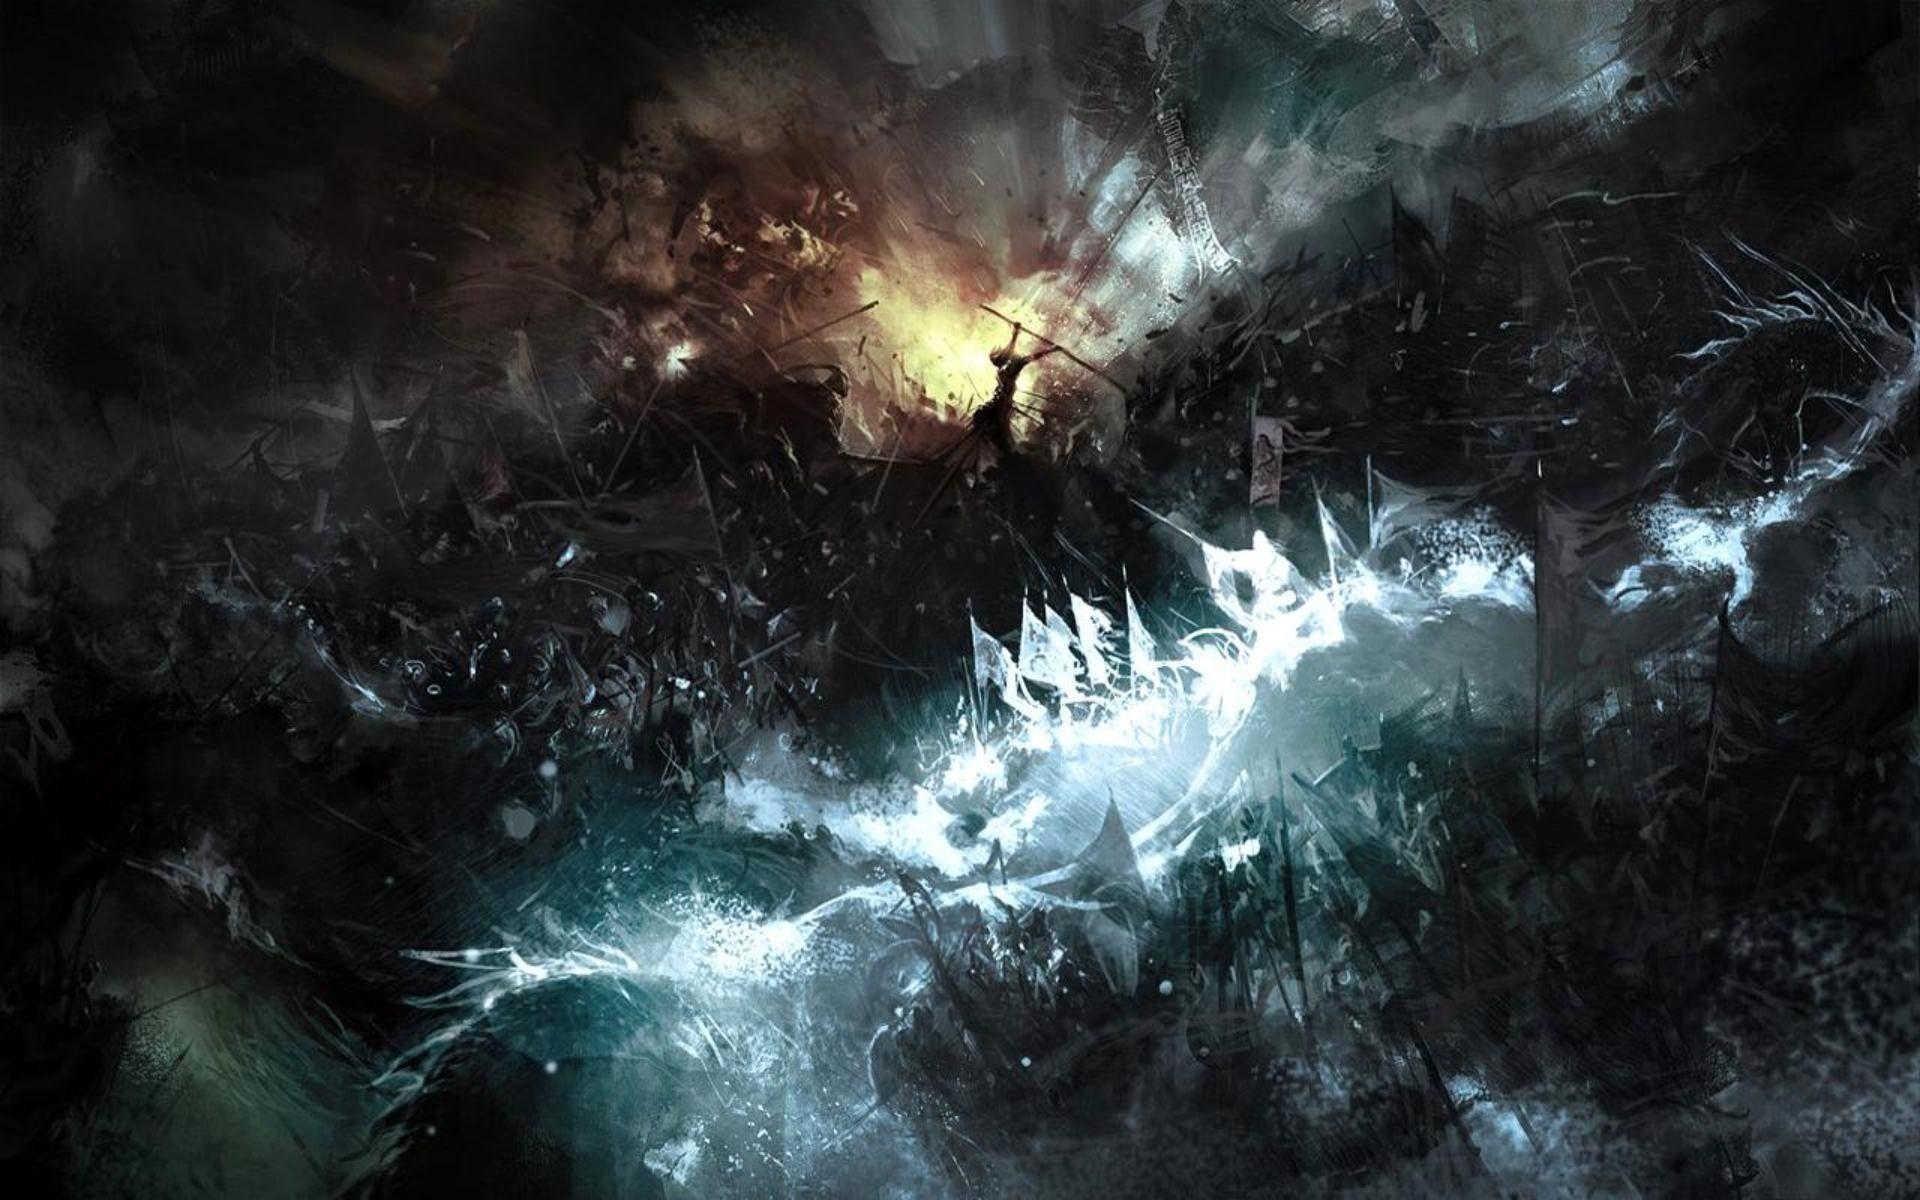 Epic Dark Fantasy Wallpapers Widescreen » Extra Wallpapers 1080p